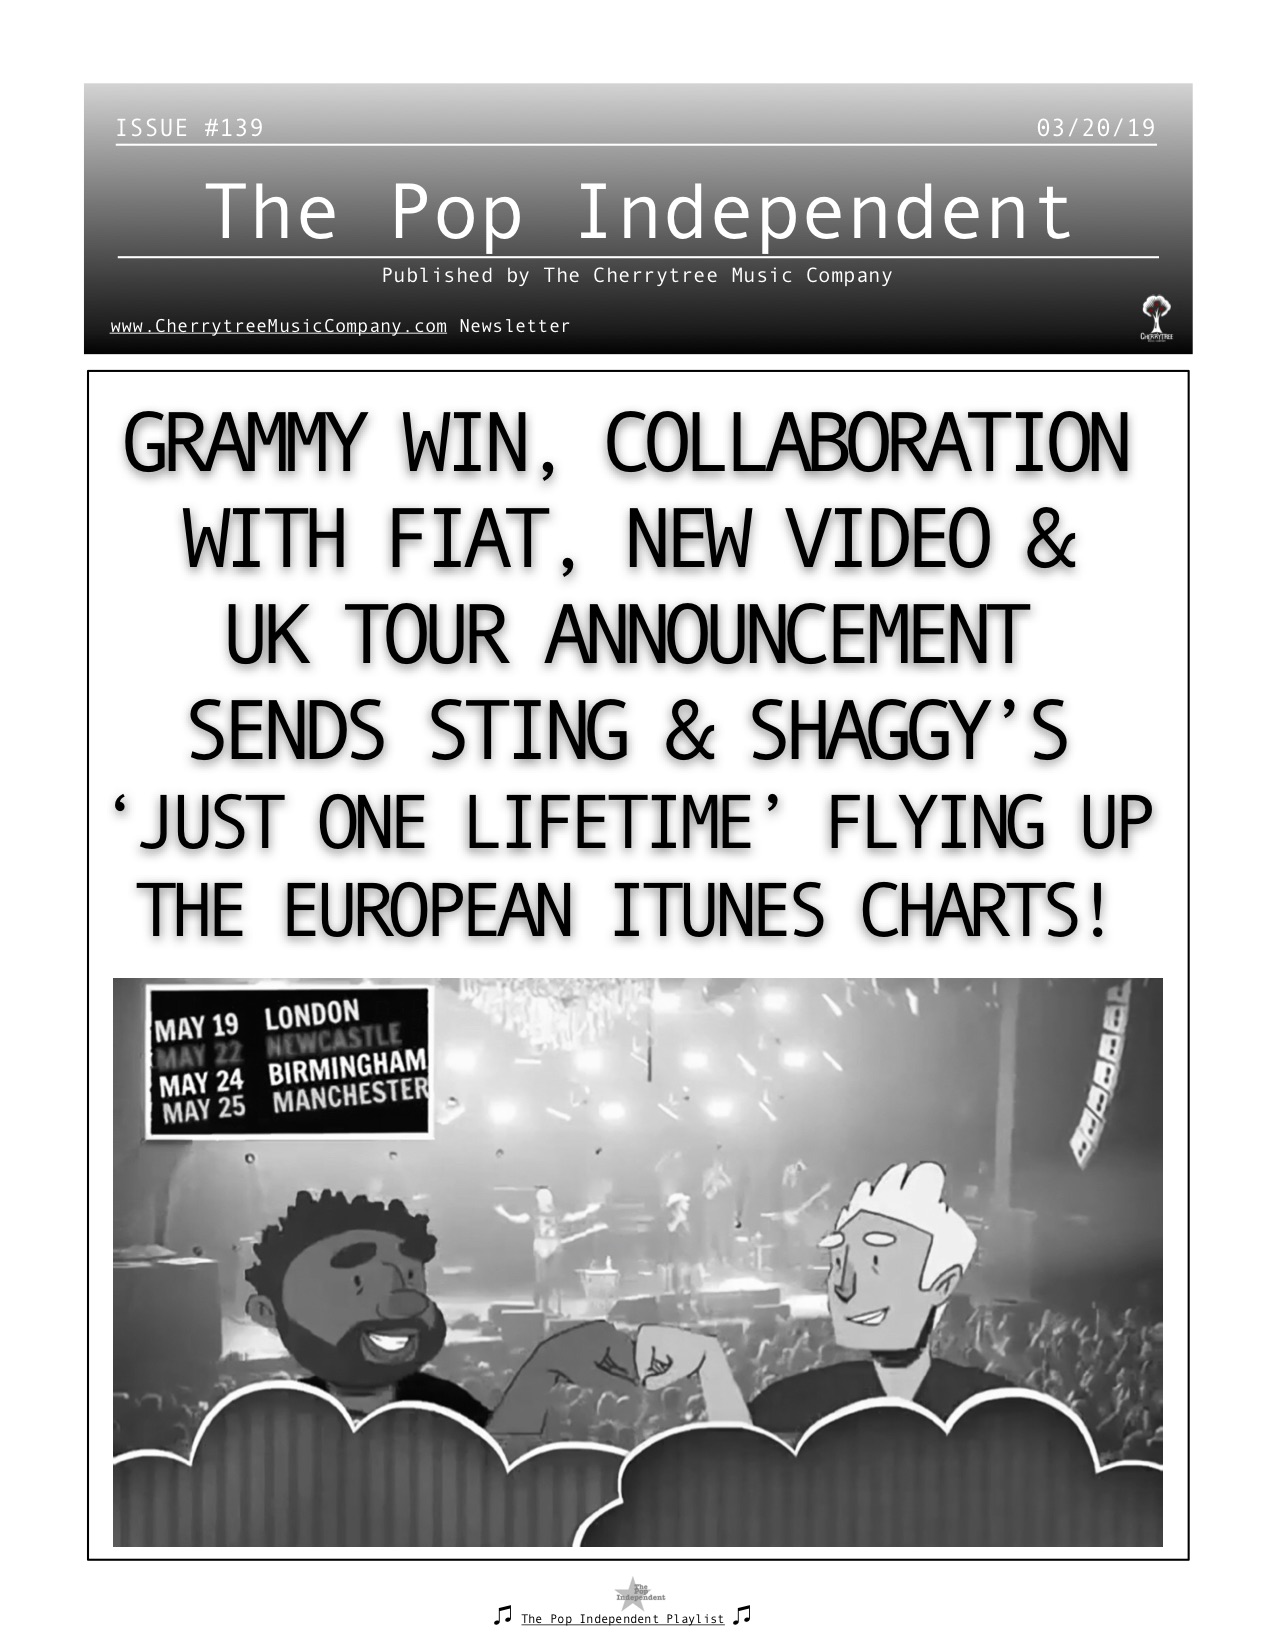 The Pop Independent, issue 139